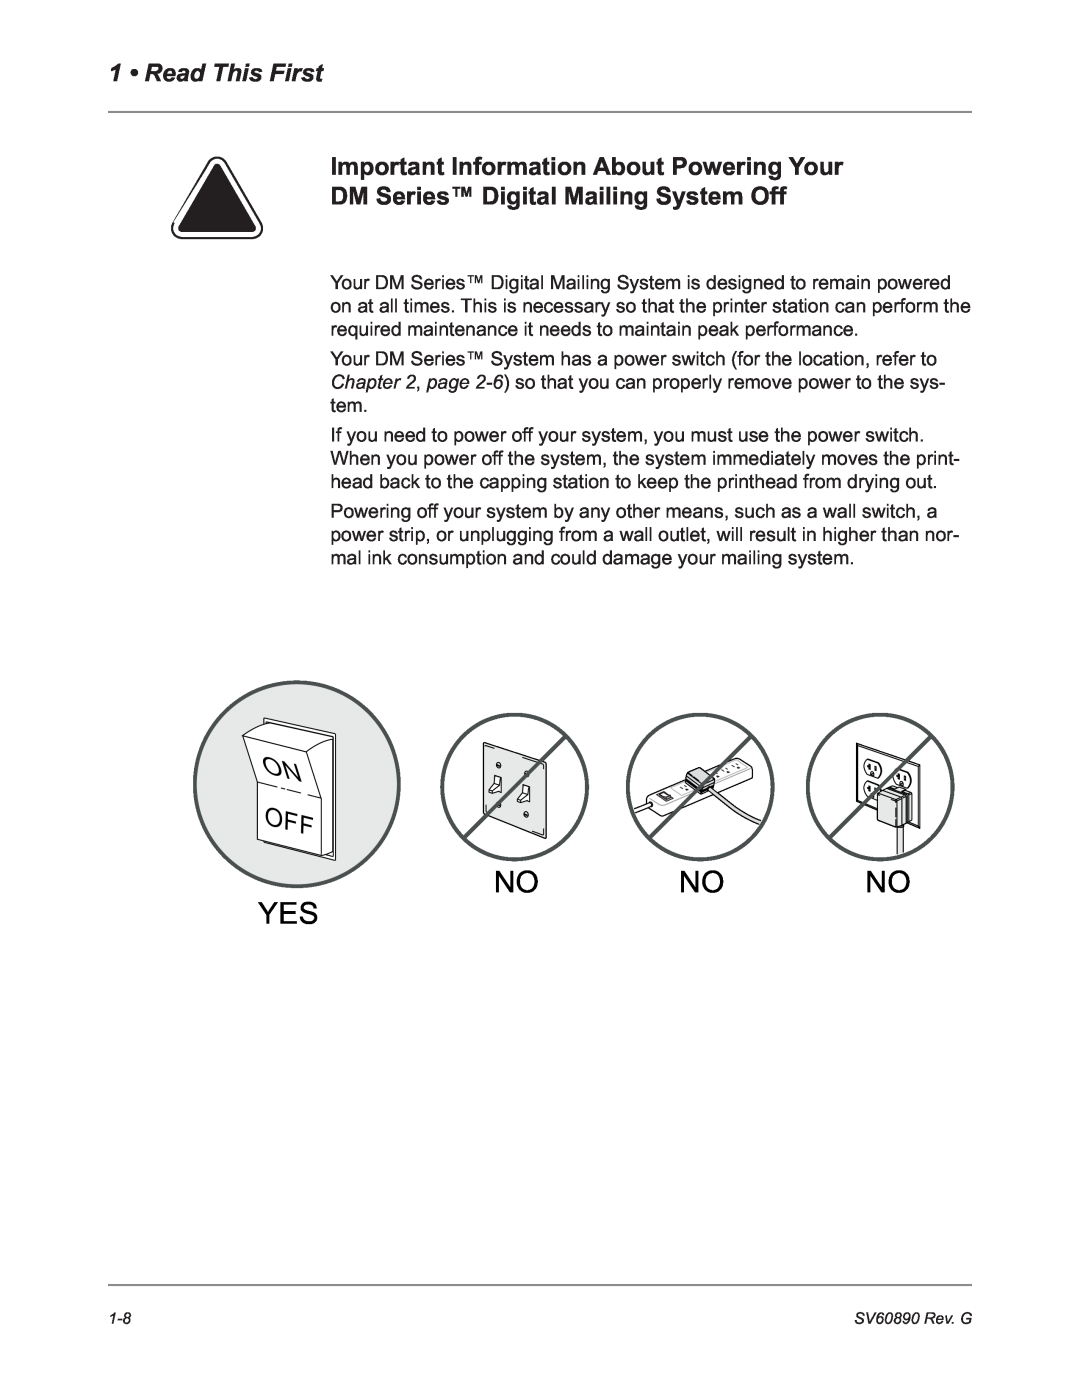 Pitney Bowes DM550, DM500 Important Information About Powering Your, DM Series Digital Mailing System Off, No No No Yes 